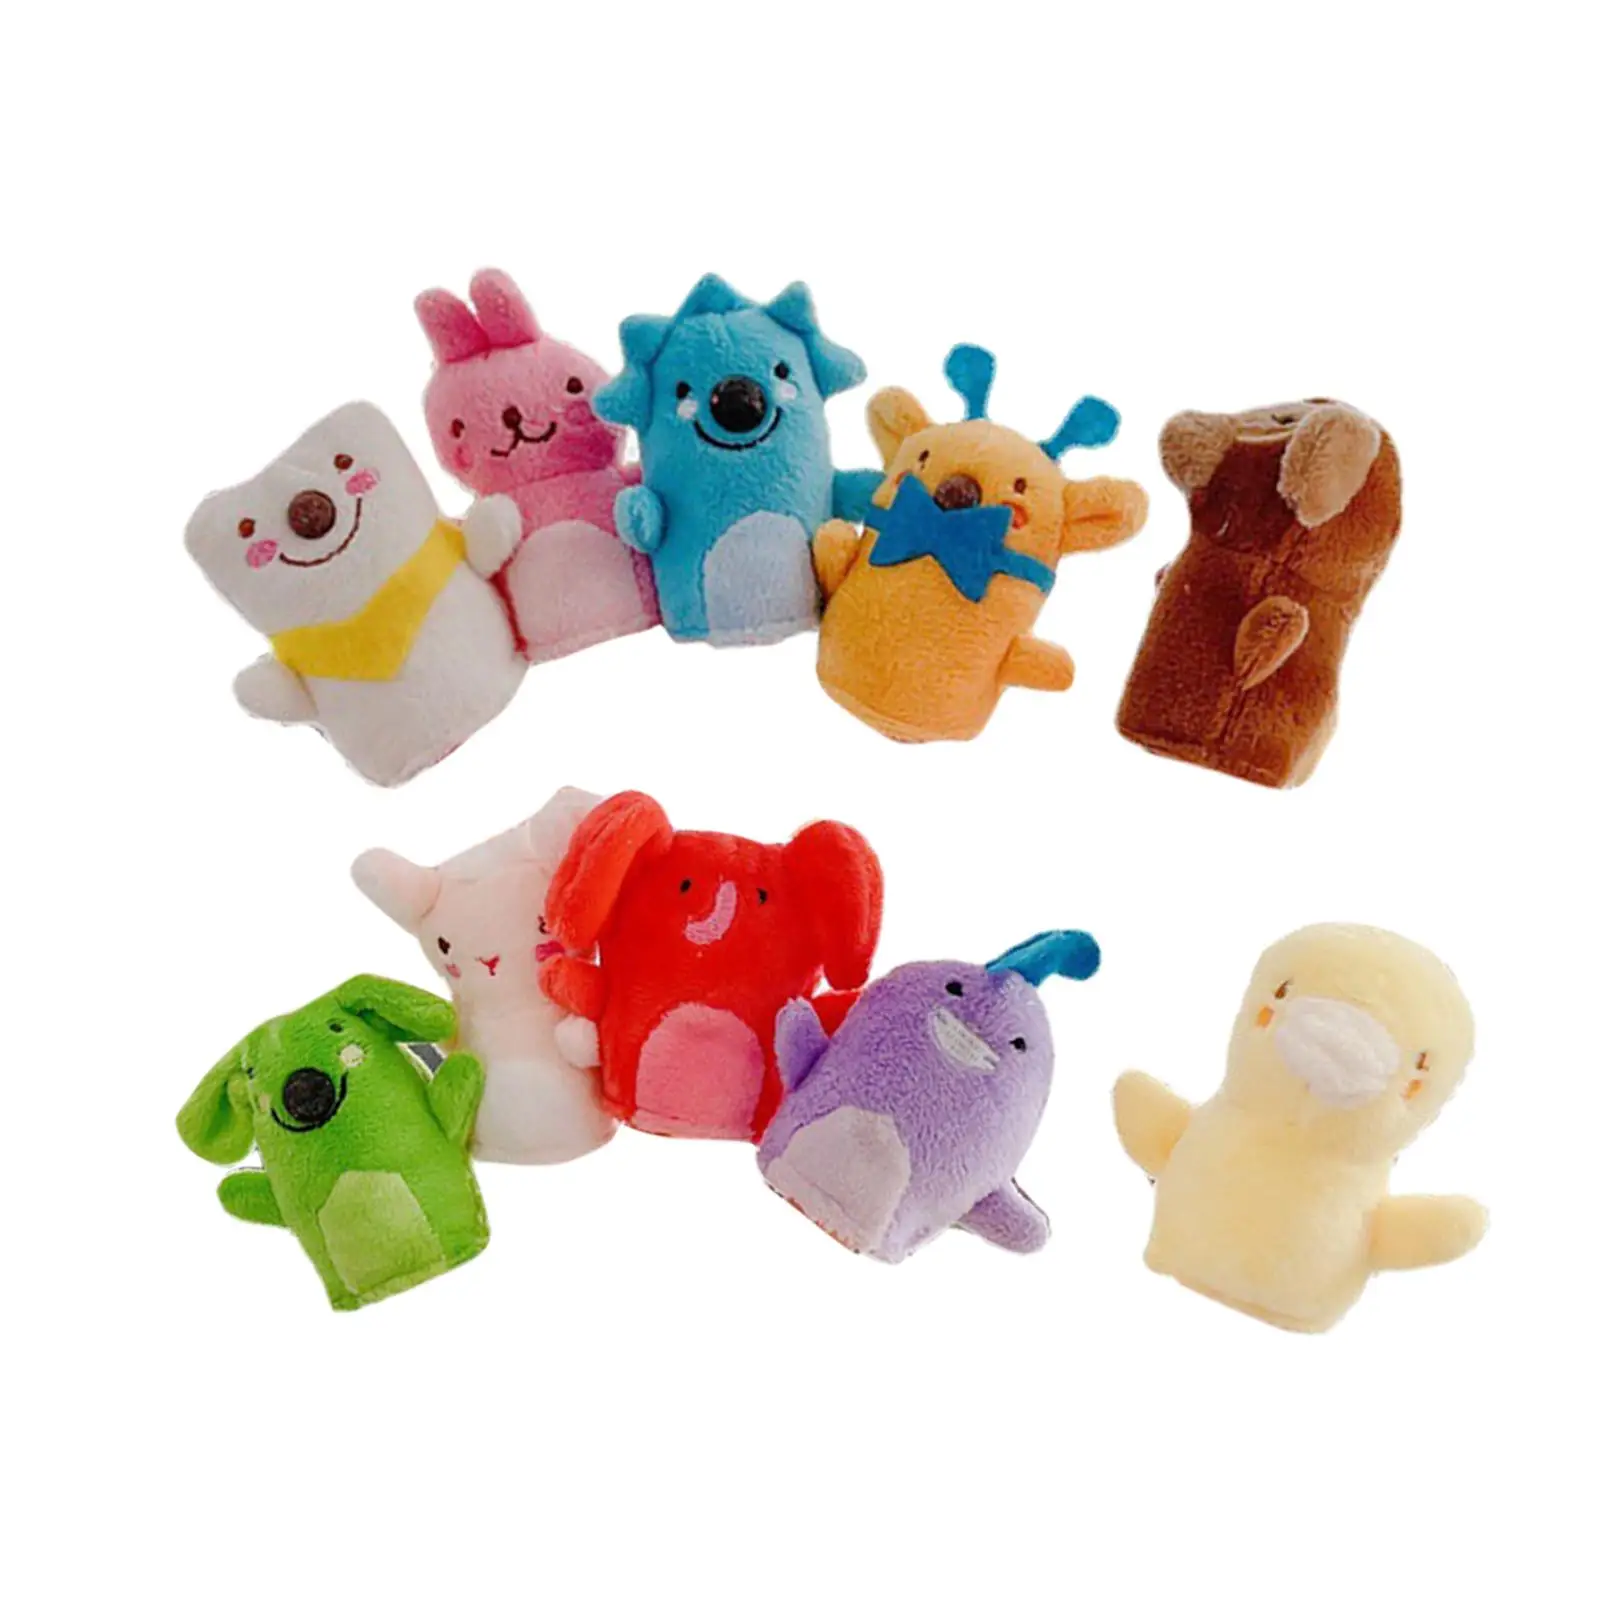 10x Finger Puppet Toy Soft Plush Animals Finger Puppet Toys for Party Favors Toddler